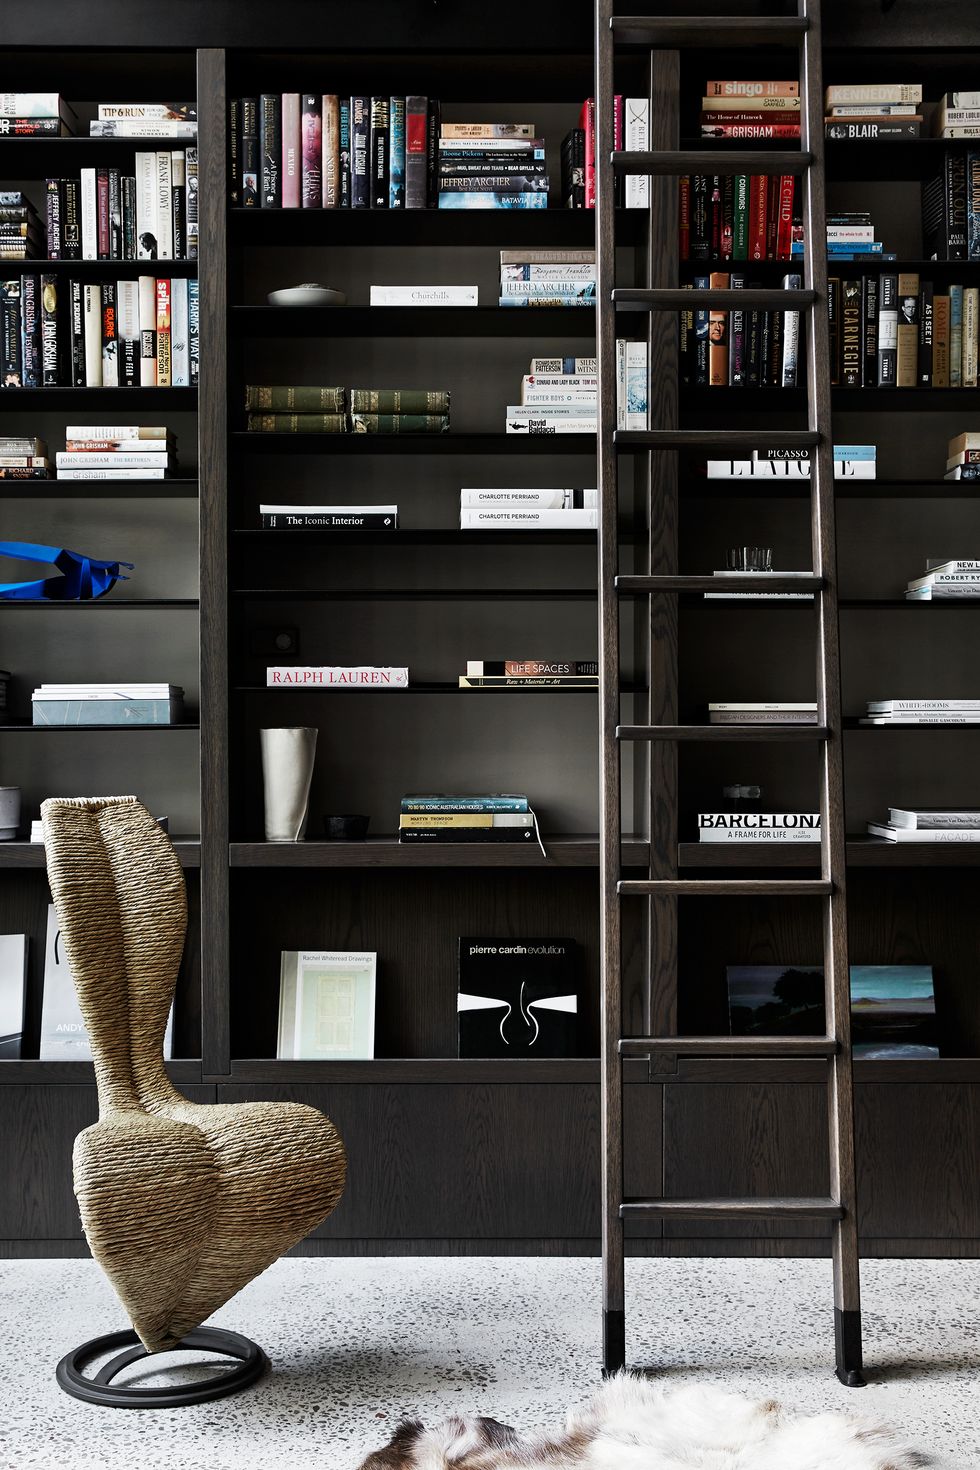 20 Built-In Bookshelf Ideas for Every Room in Your Home